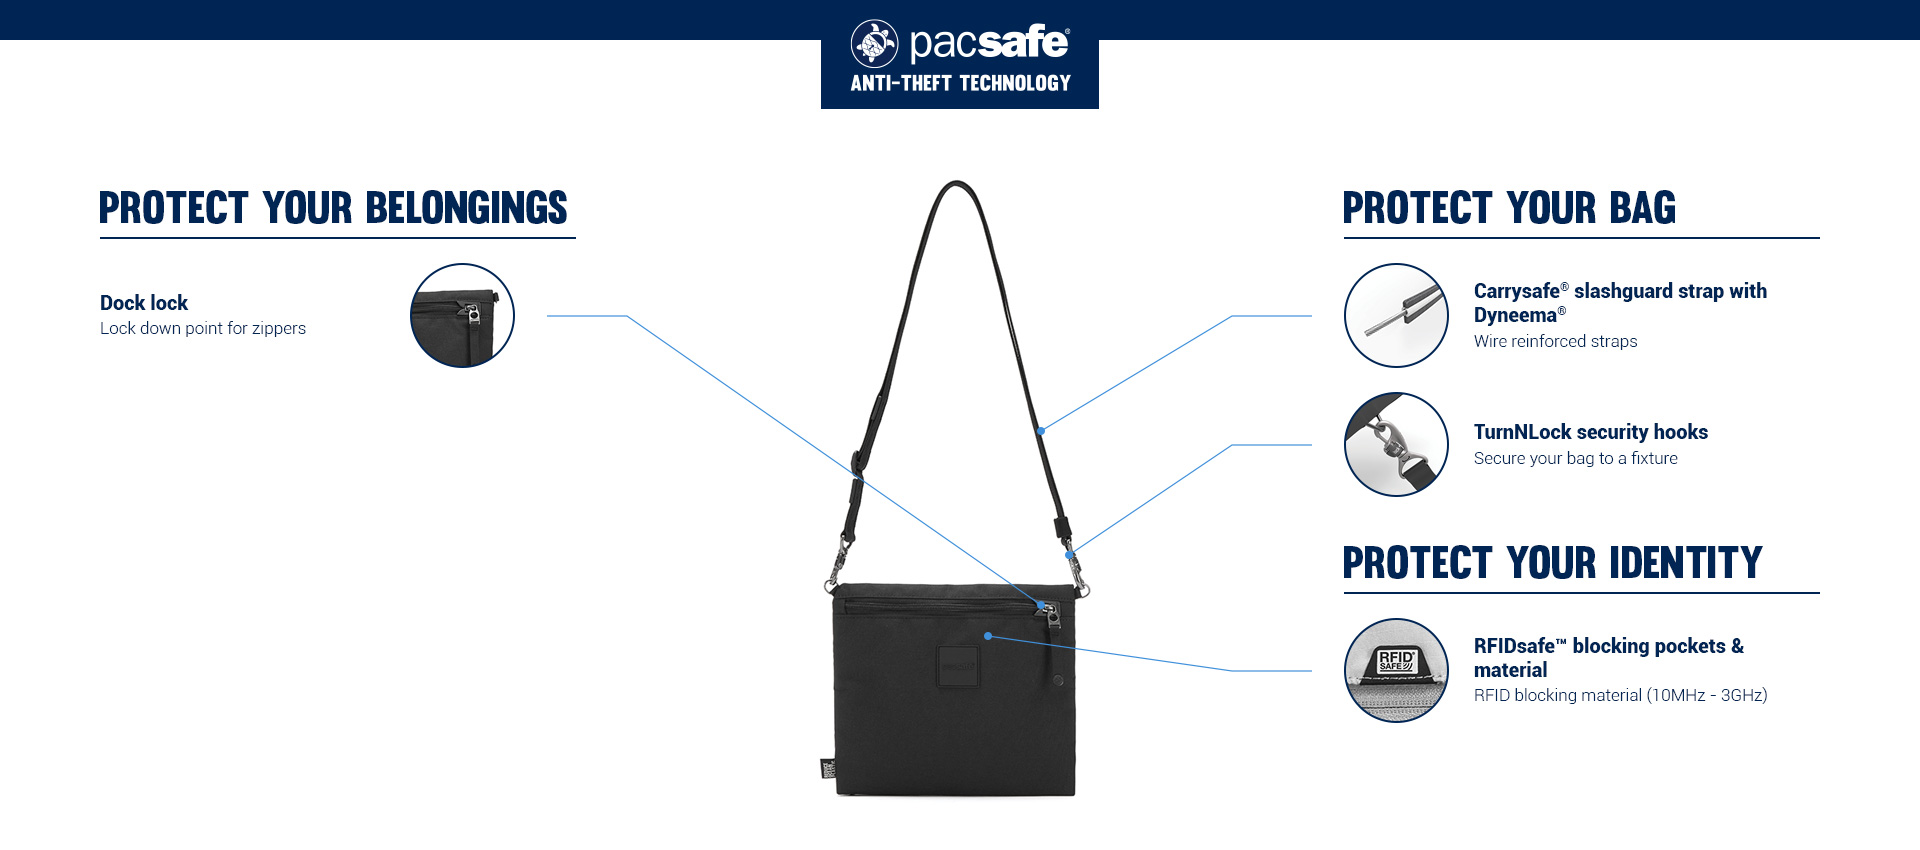 Protect Your Belongings - Dock  lock - Lock down point for zippers. 
Protect Your Bag - Carrysafe slashguard strap with Dyneema - wire reinforced straps.
TurnNLock security hooks - Secure your bag to a fixture.
Protect Your Identity - RFIDsafe blocking pockets & material - RFID blocking material (10 MHz - 3 GHz)